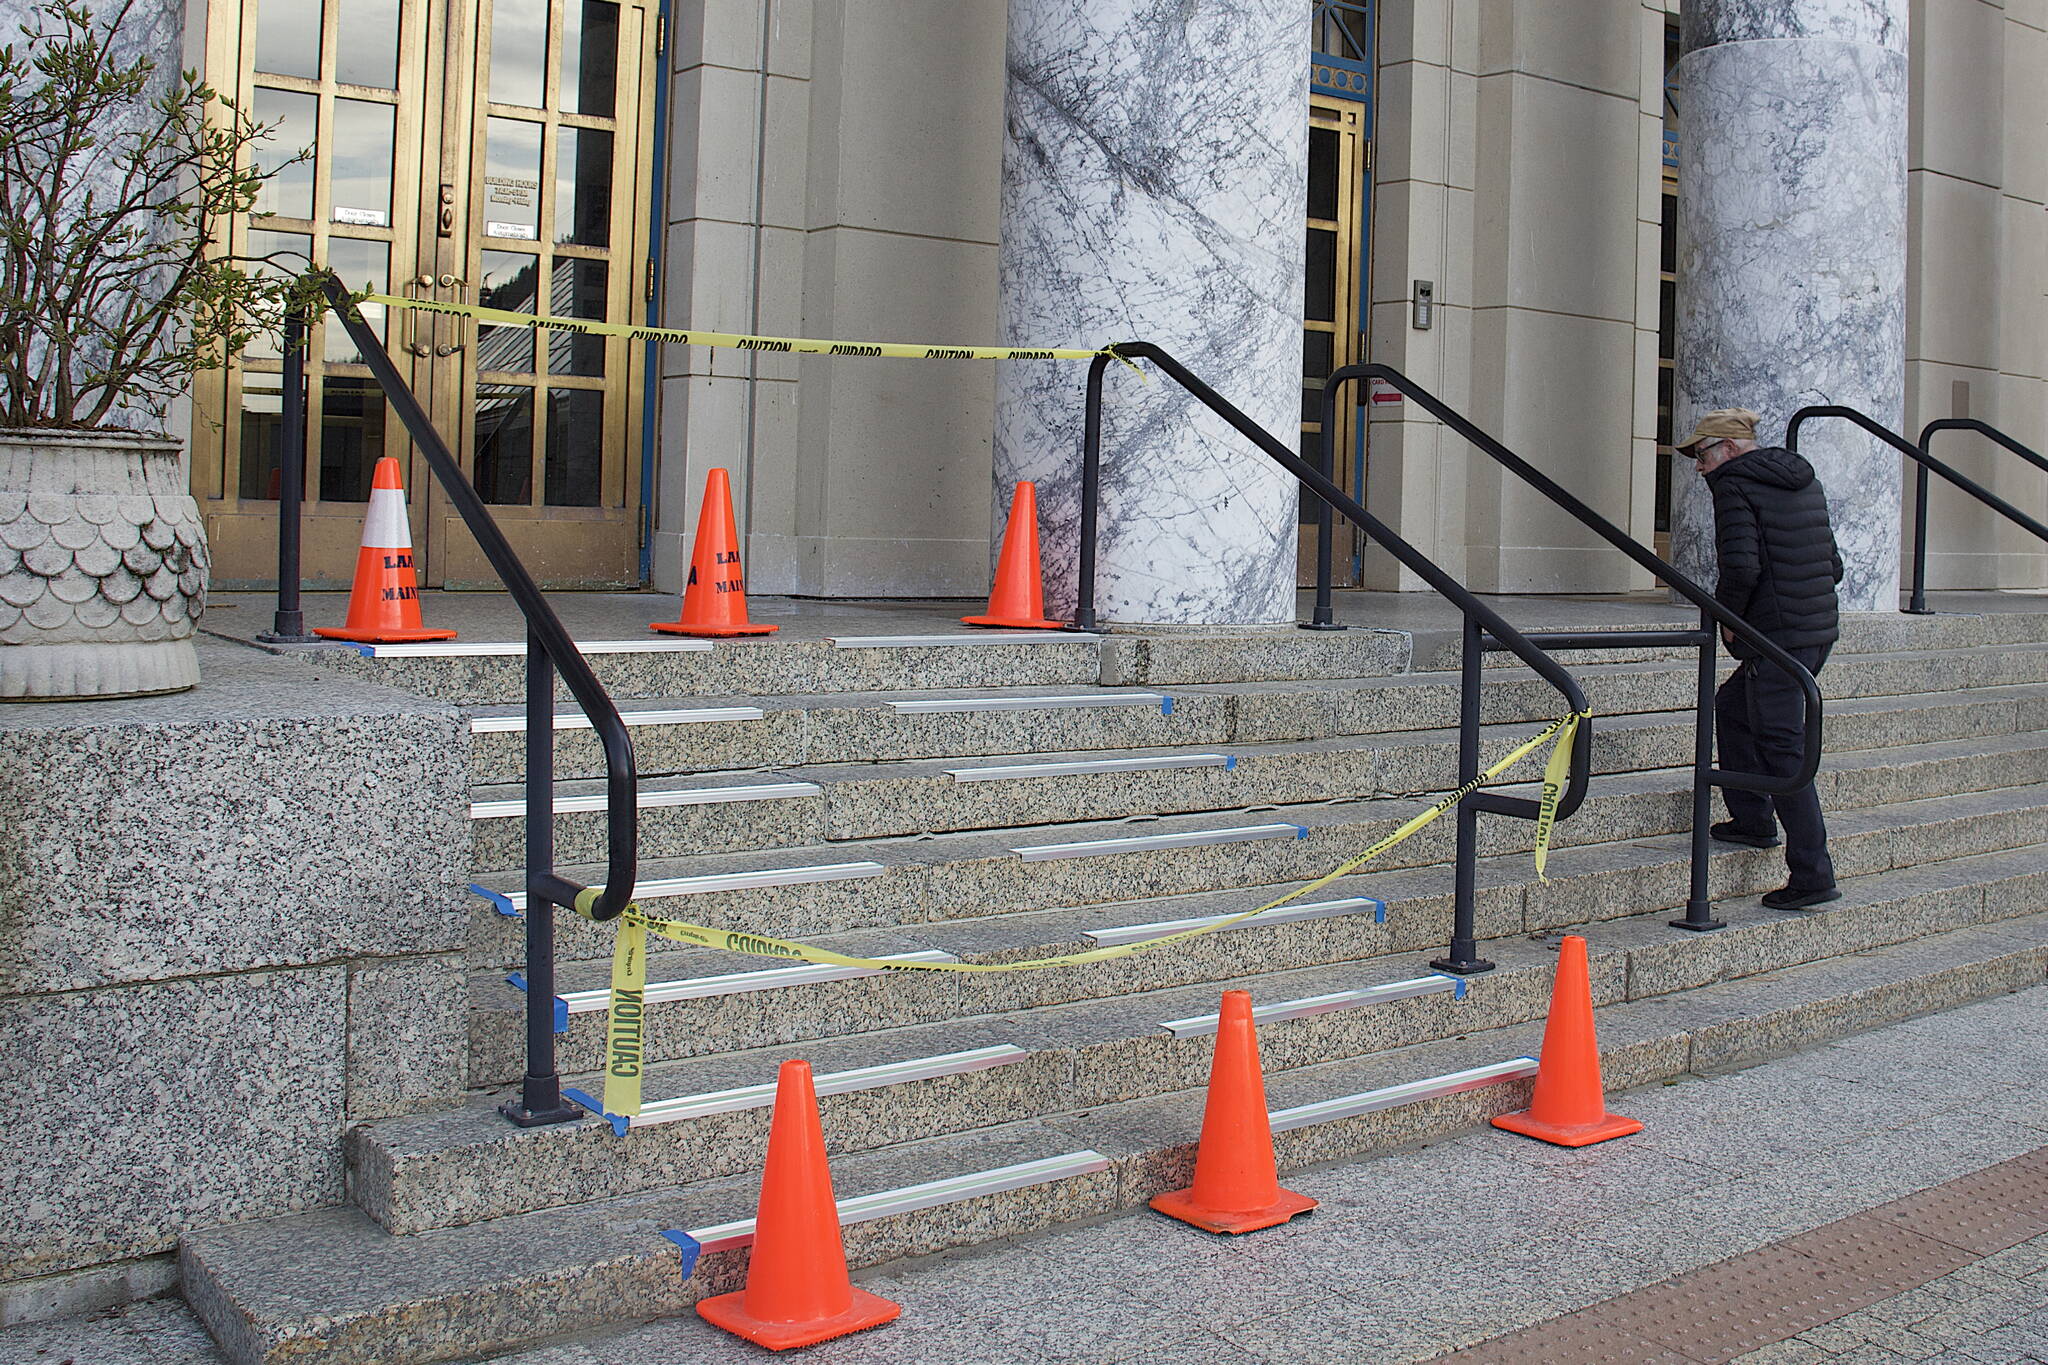 A person entering the Alaska State Capitol on Wednesday morning looks at reflective anti-slip strips being installed on the stairs. The entrance stairs of the 82-year-old building are slippery when wet or icy, and the initial weeks of the legislature session occur when Juneau is experiencing long hours of darkness. (Mark Sabbatini / Juneau Empire)